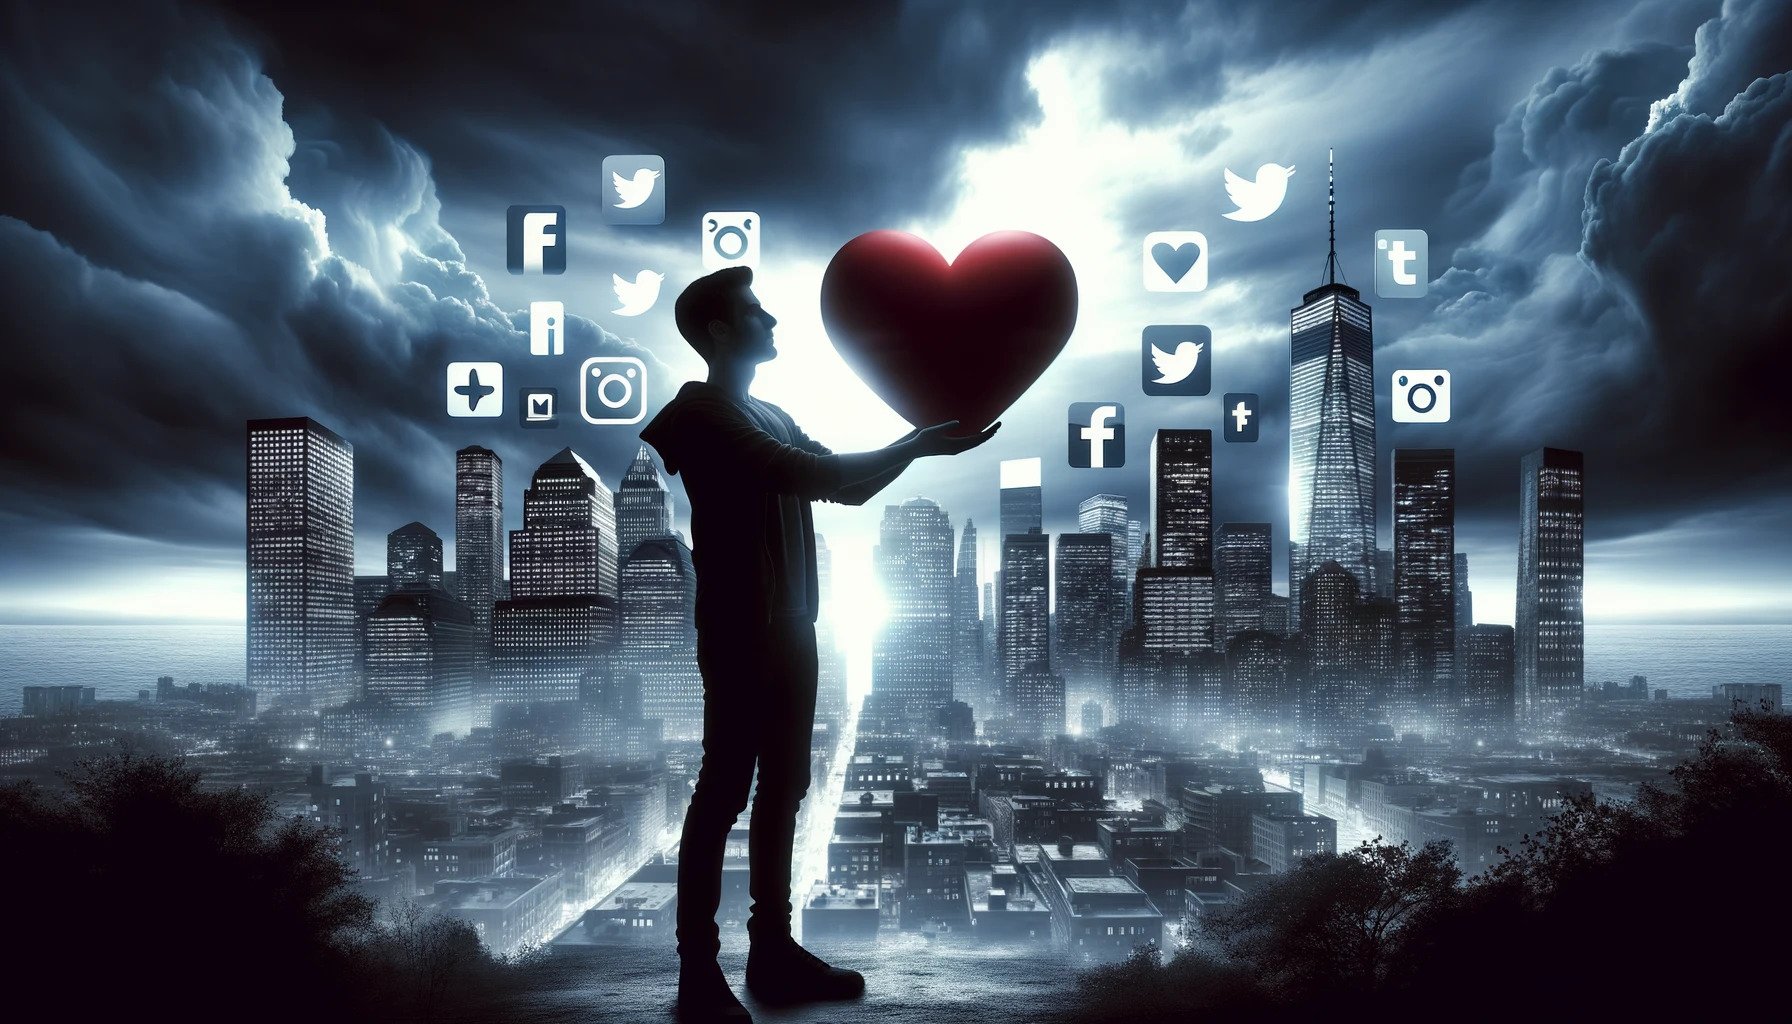 Photo of a silhouette of a male YouTuber holding a giant heart, symbolizing philanthropy, against a stormy skyline with skyscrapers bearing logos of various social media platforms.